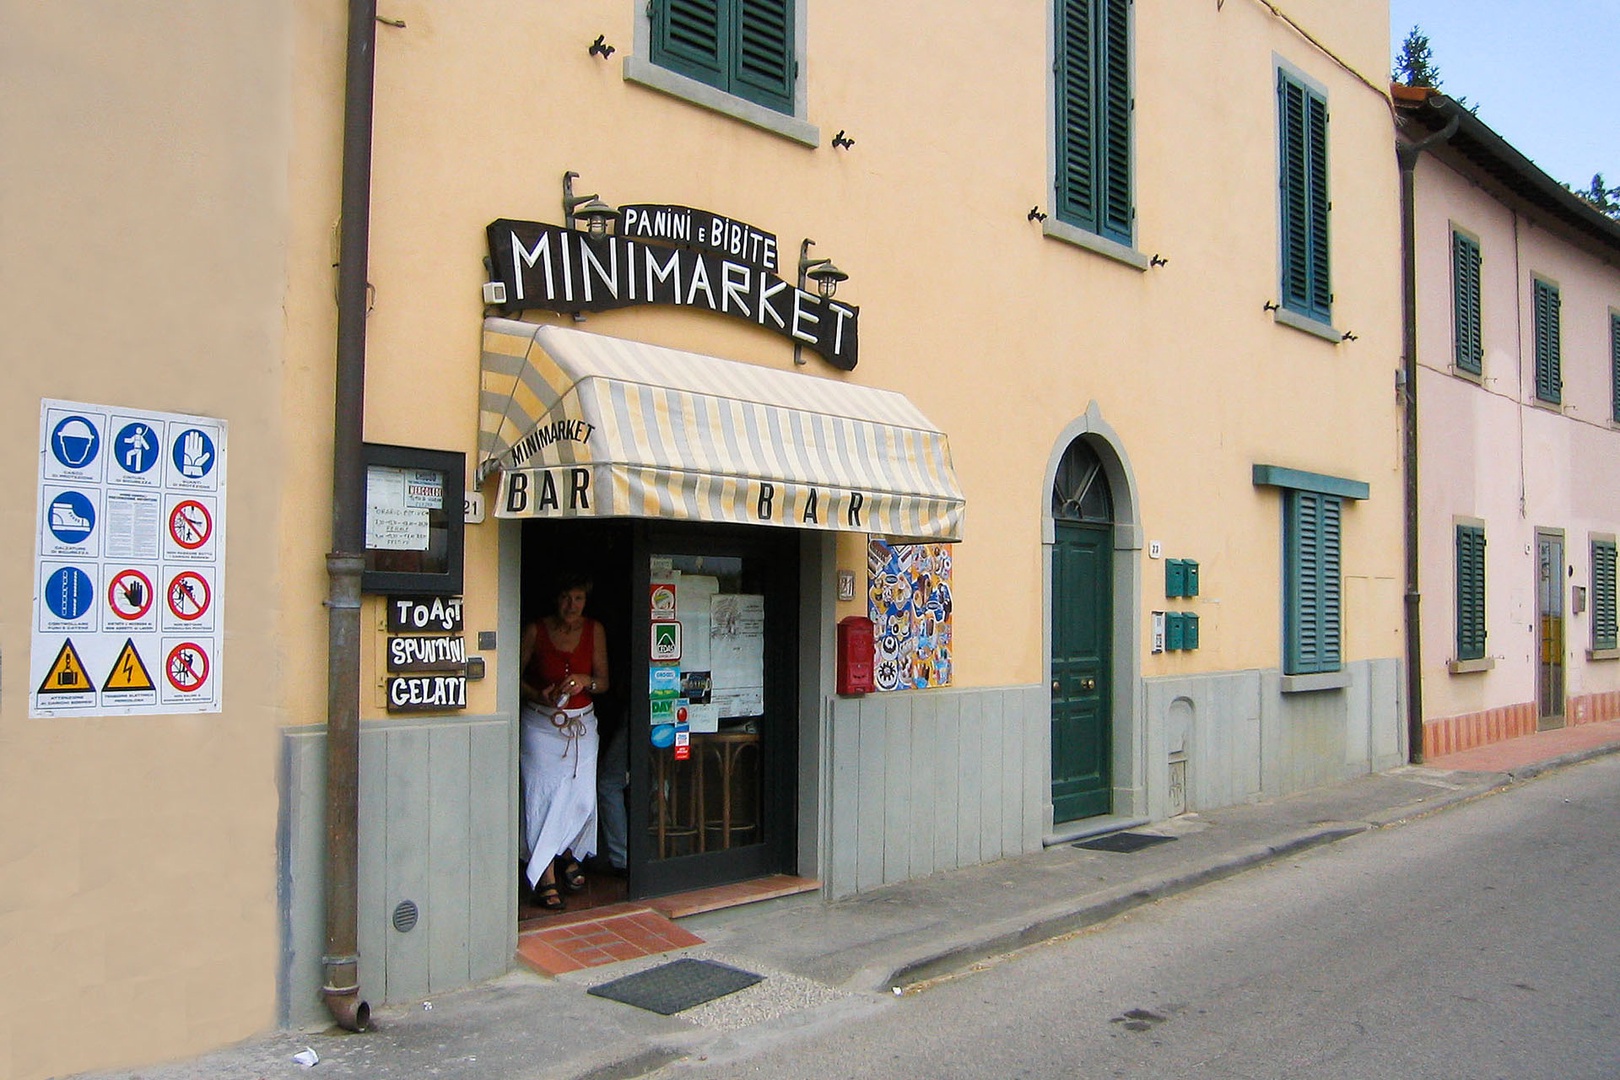 The little cafe in Romita has a few grocery items.